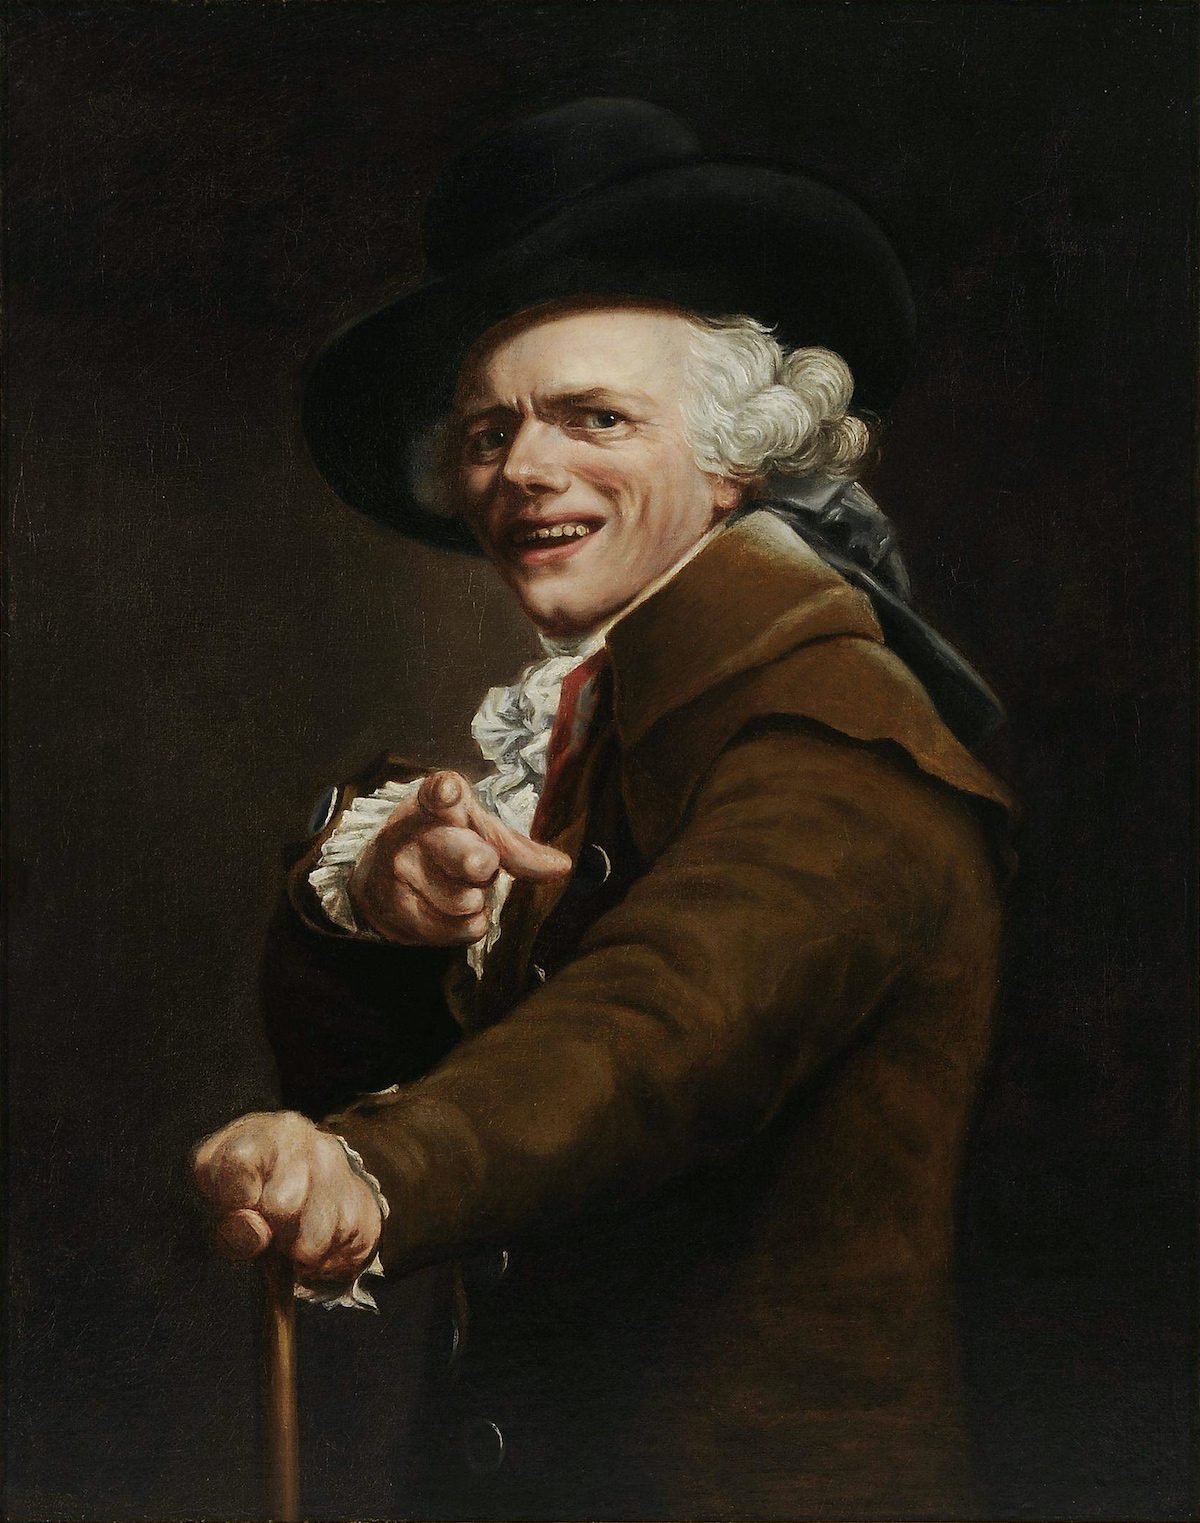   Joseph Ducreux's Self-portrait in the Guise of a Mockingbird is a Neoclassical oil on canvas painting created by Joseph Ducreux in 1791. You can see it at the Musée du Louvre in Paris. 